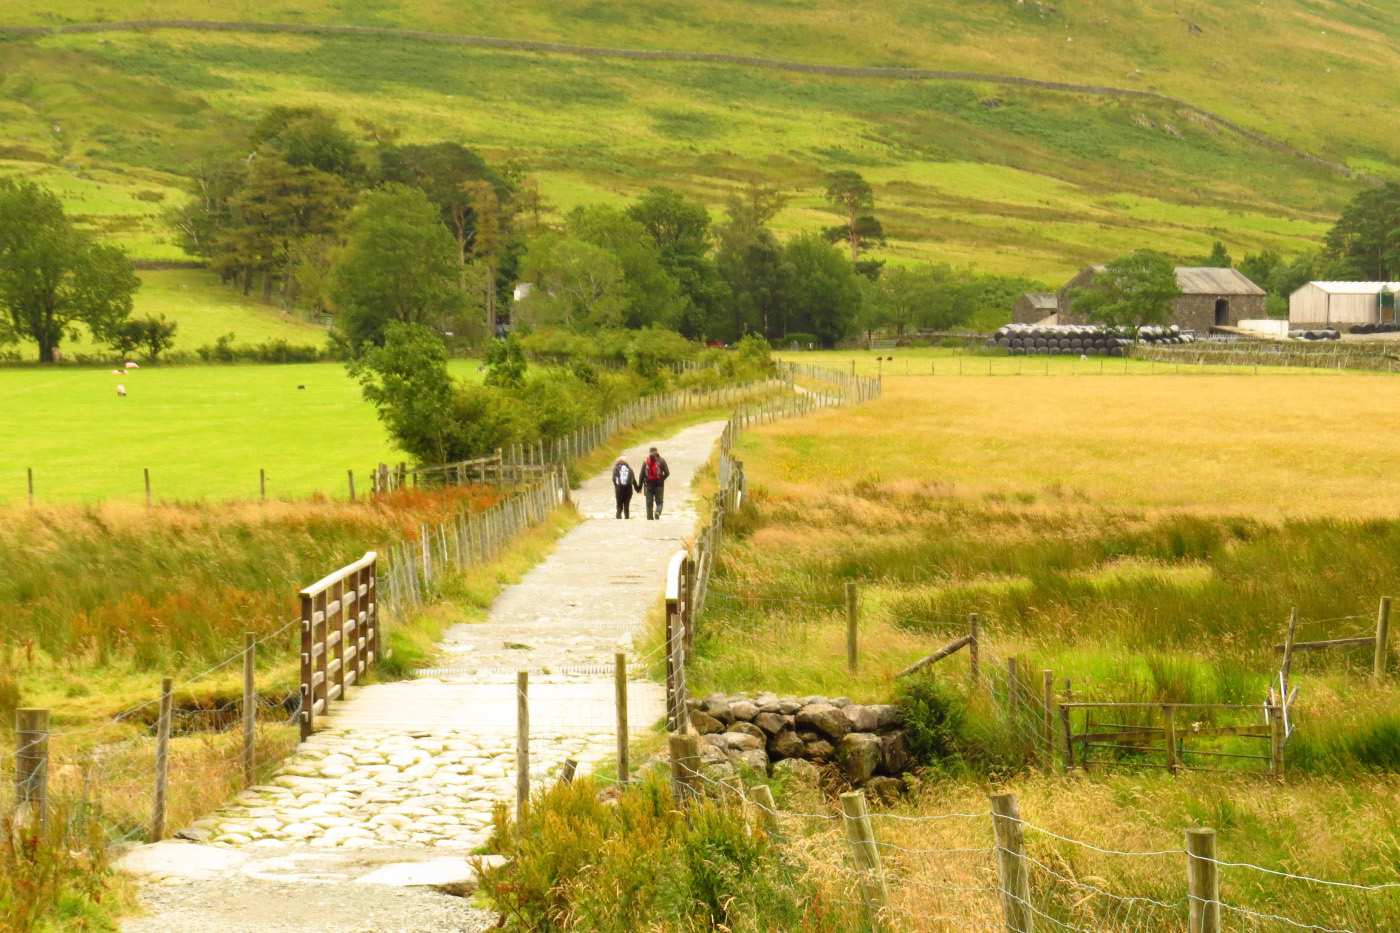 The Lake District offers an enormous variety of walks. Image by Will Jones / Lonely Planet